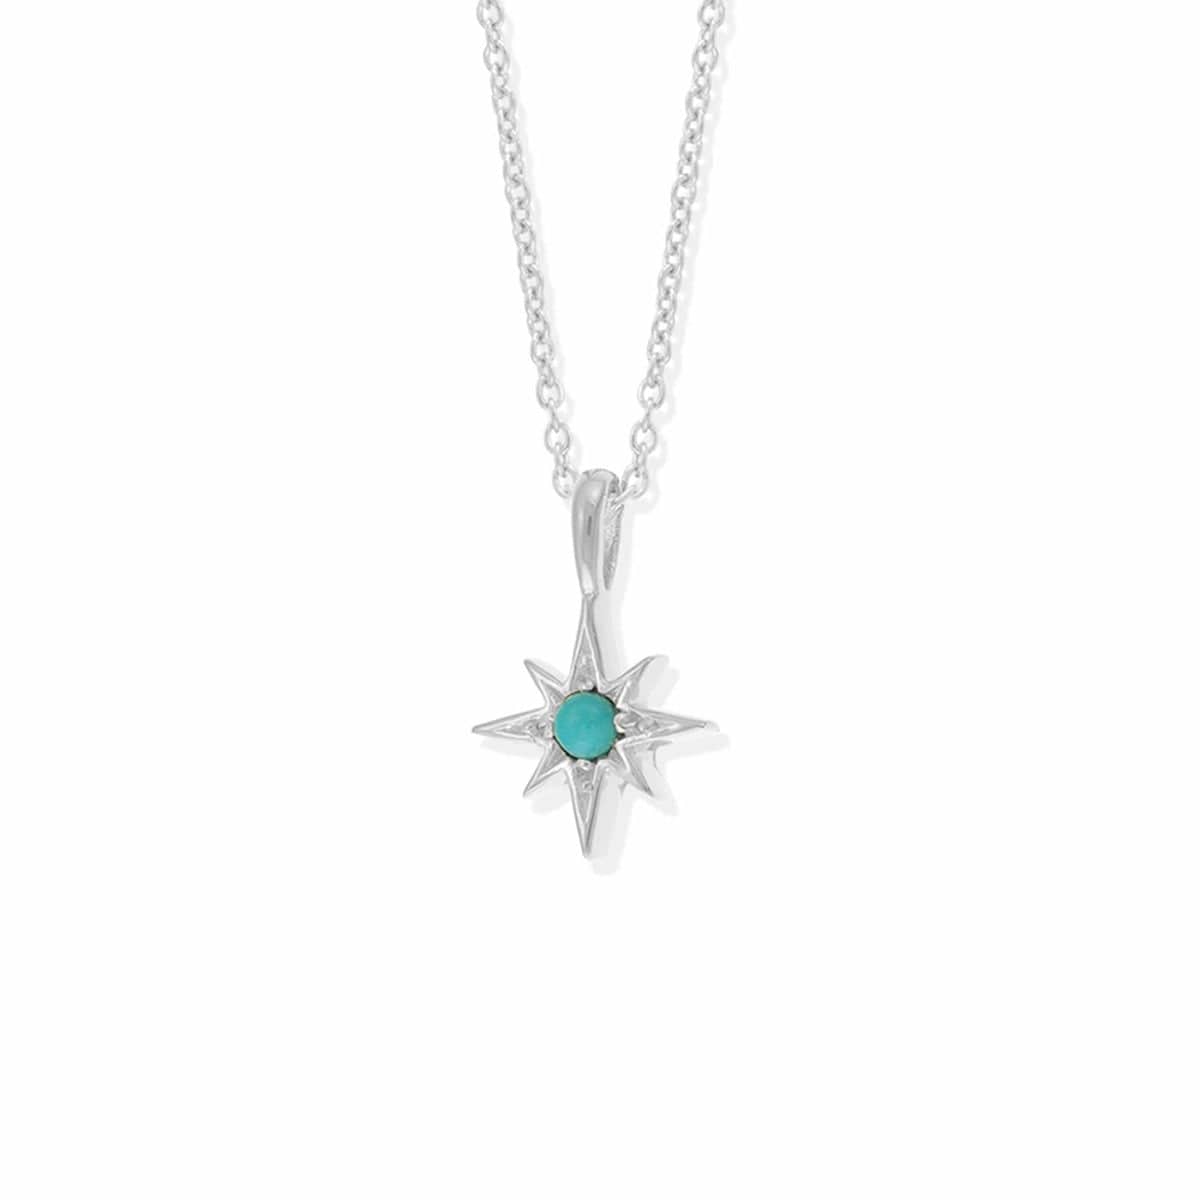 Boma Jewelry Necklaces Sterling Silver with Turquoise Luna Star Pendant with Stone